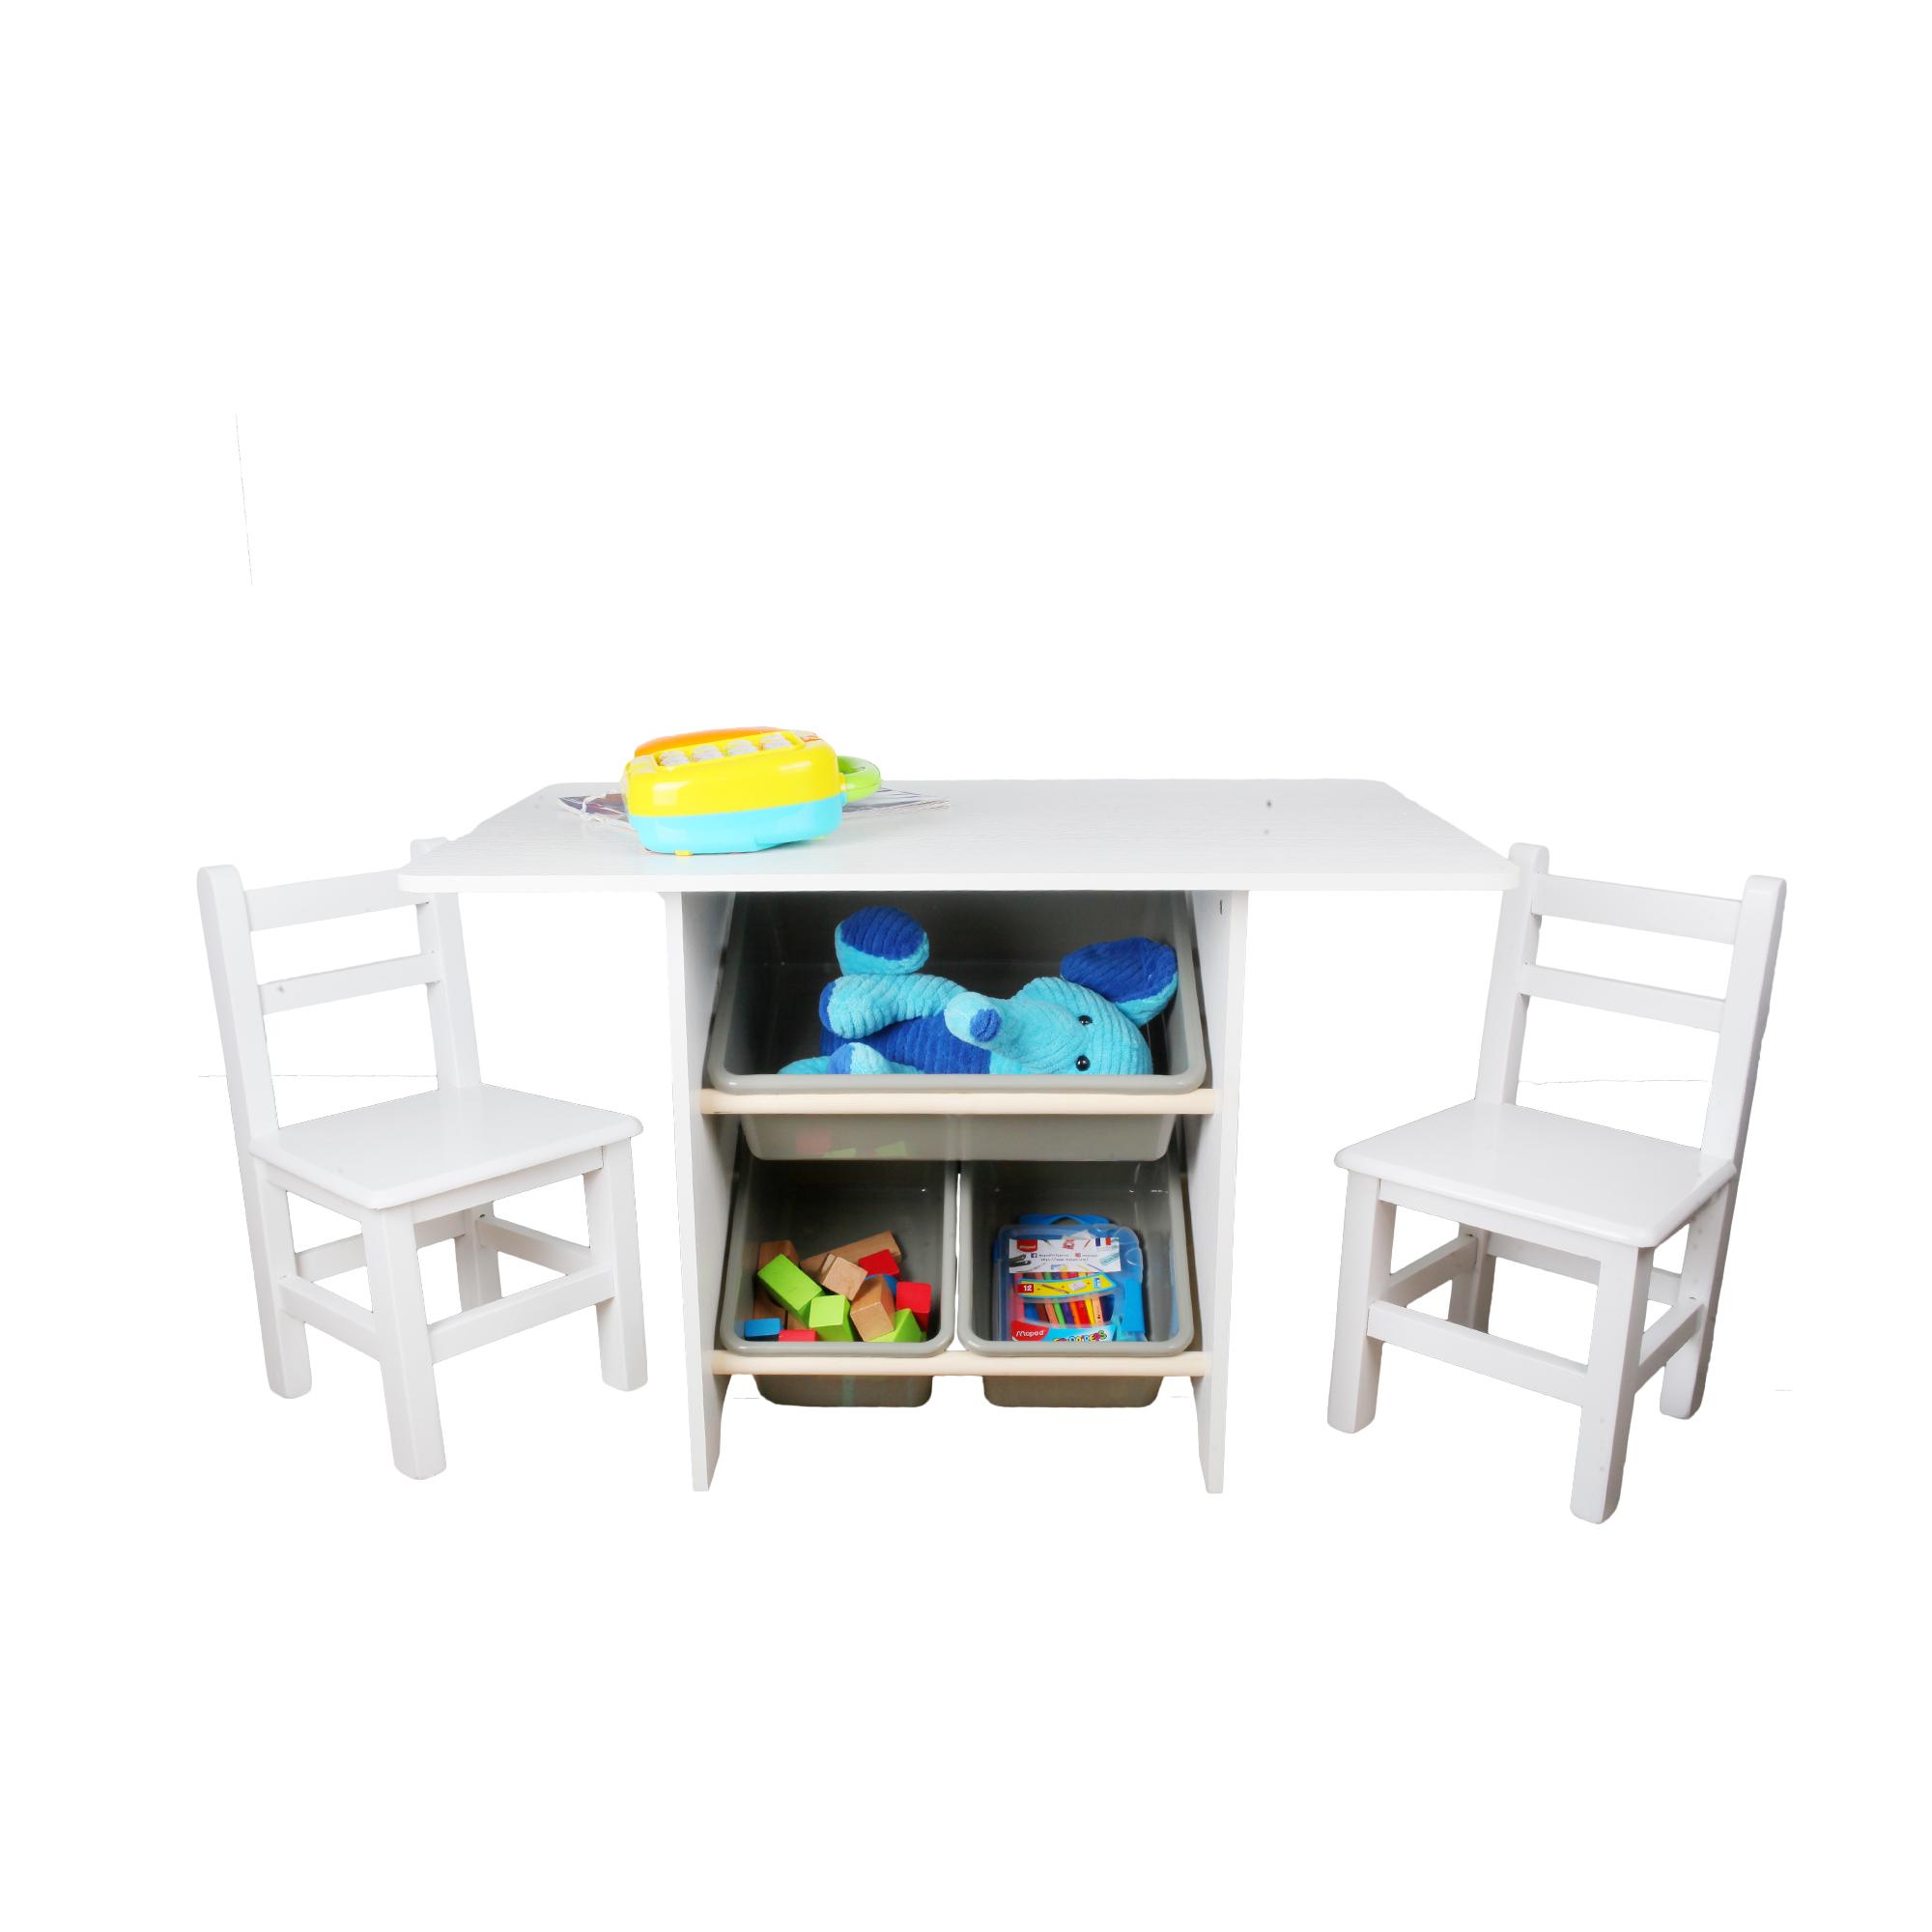 3 Piece Toddler Plastic Table And Chairs Set For Boys Or Girls